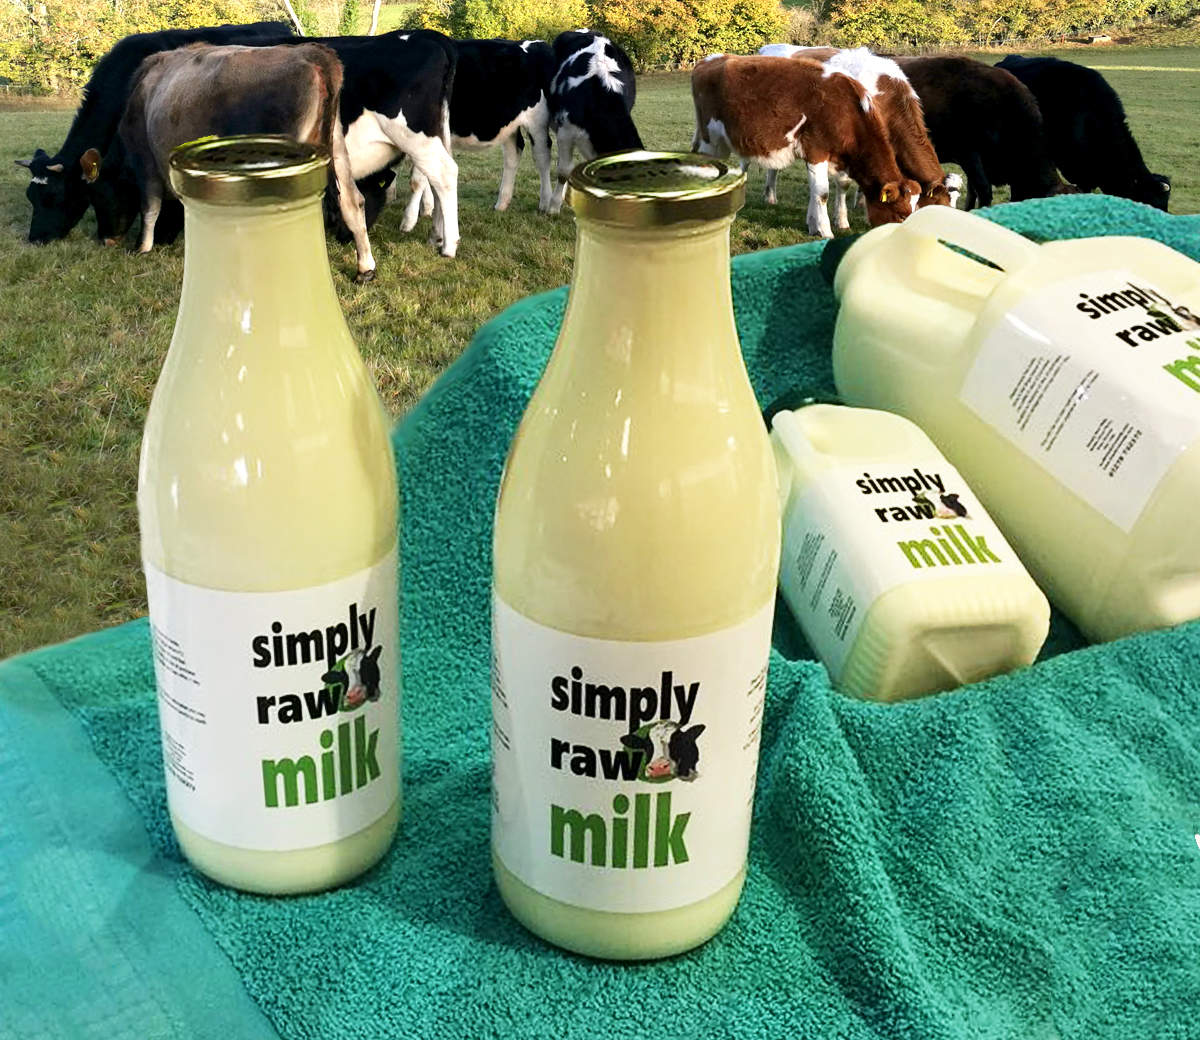 Simply Raw Milk - with the cows